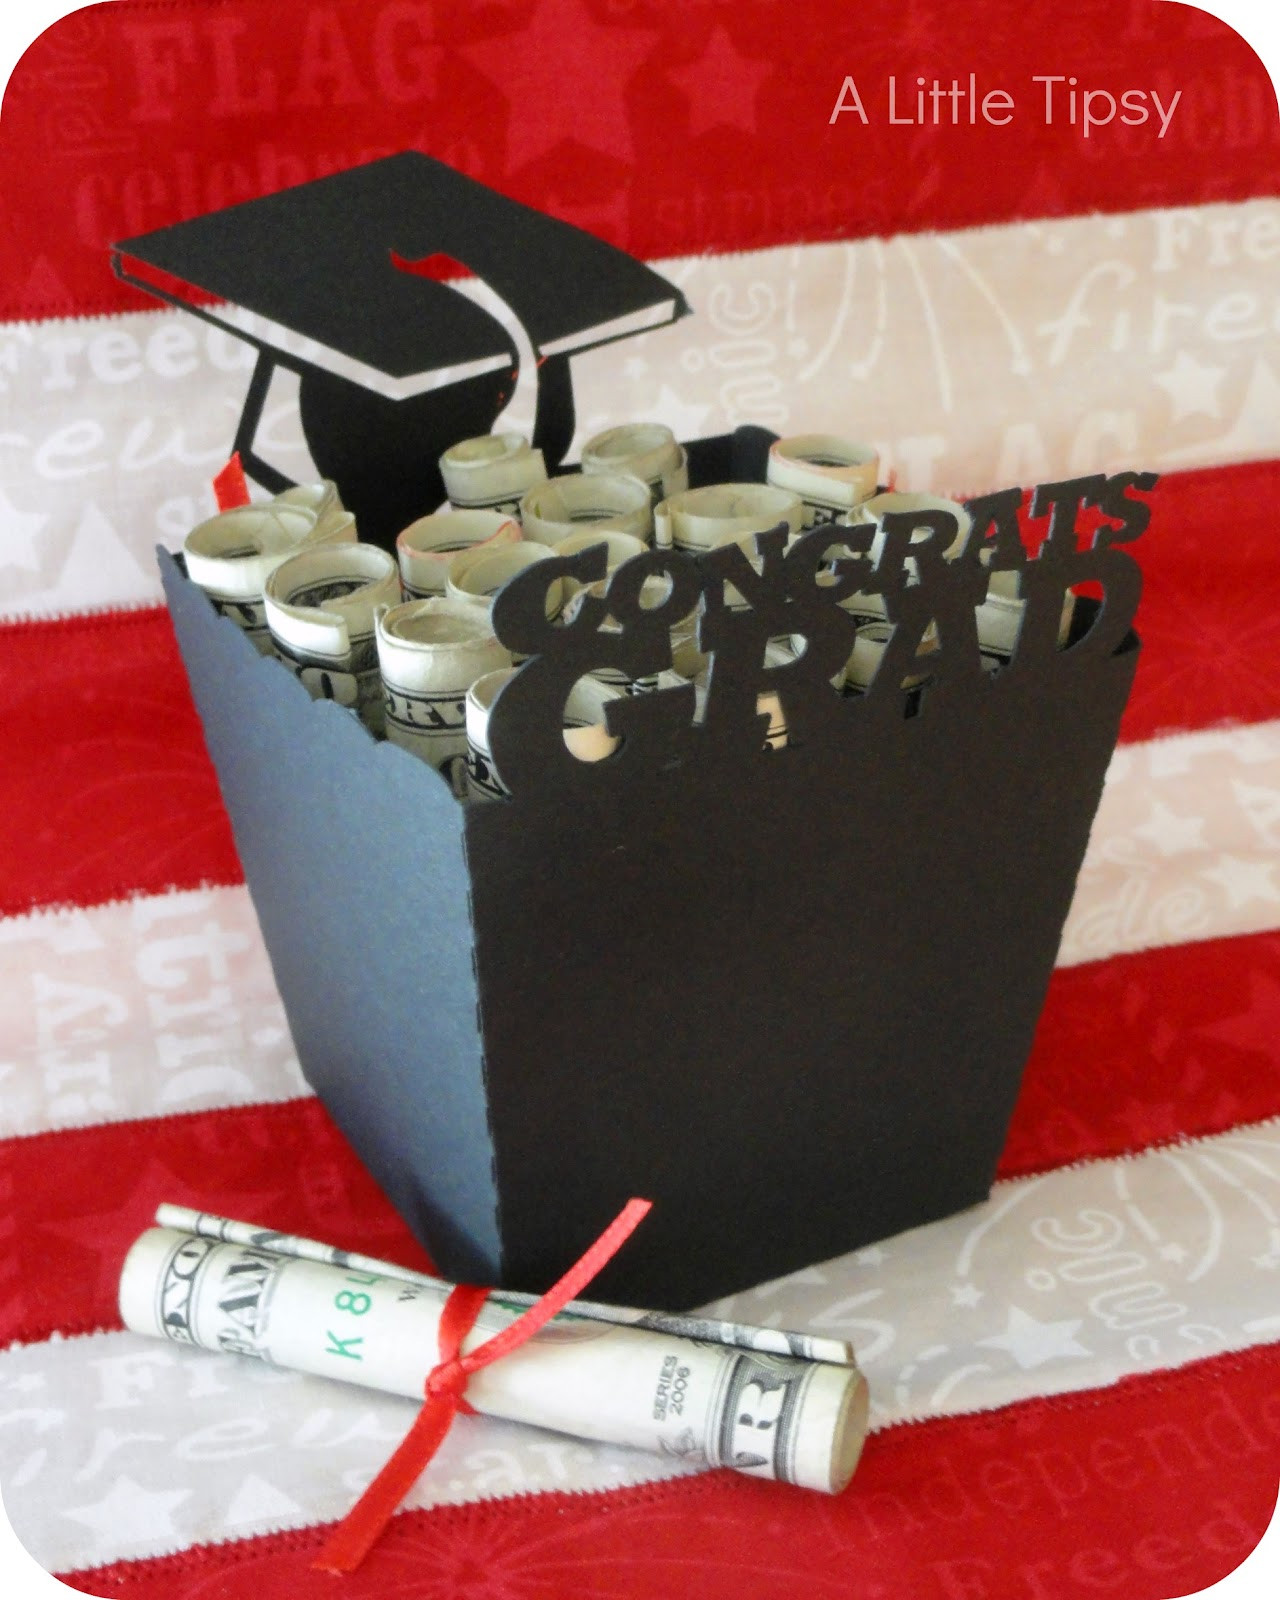 College Graduation Gift Ideas For Her
 Last Minute Graduation Gift A Little Tipsy